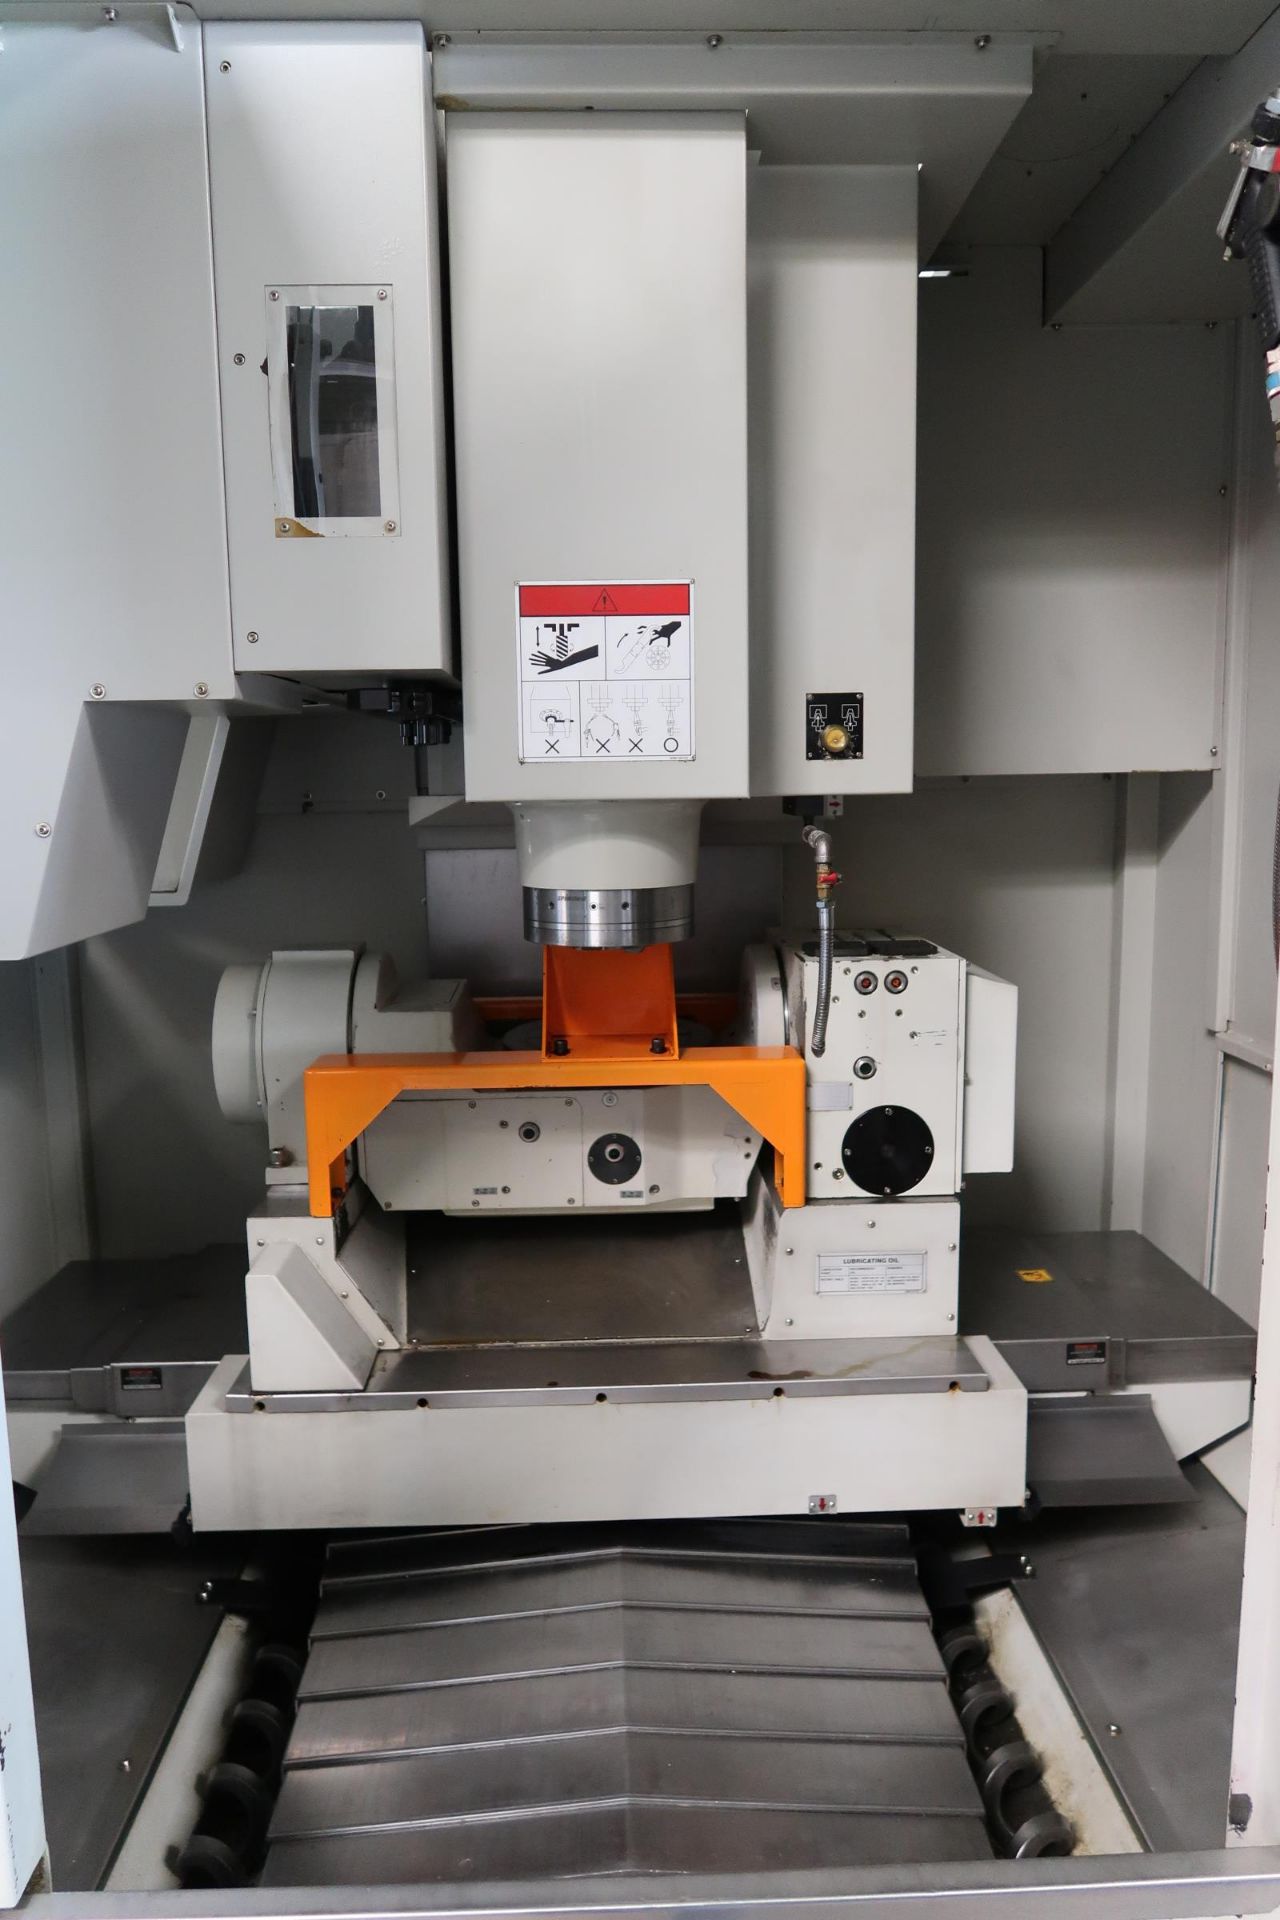 2011 Quaser MF400C/10C 5-Axis CNC Machining Center s/n 306B110041 w/ Fanuc Series 0i-MD, SOLD AS IS - Image 4 of 16